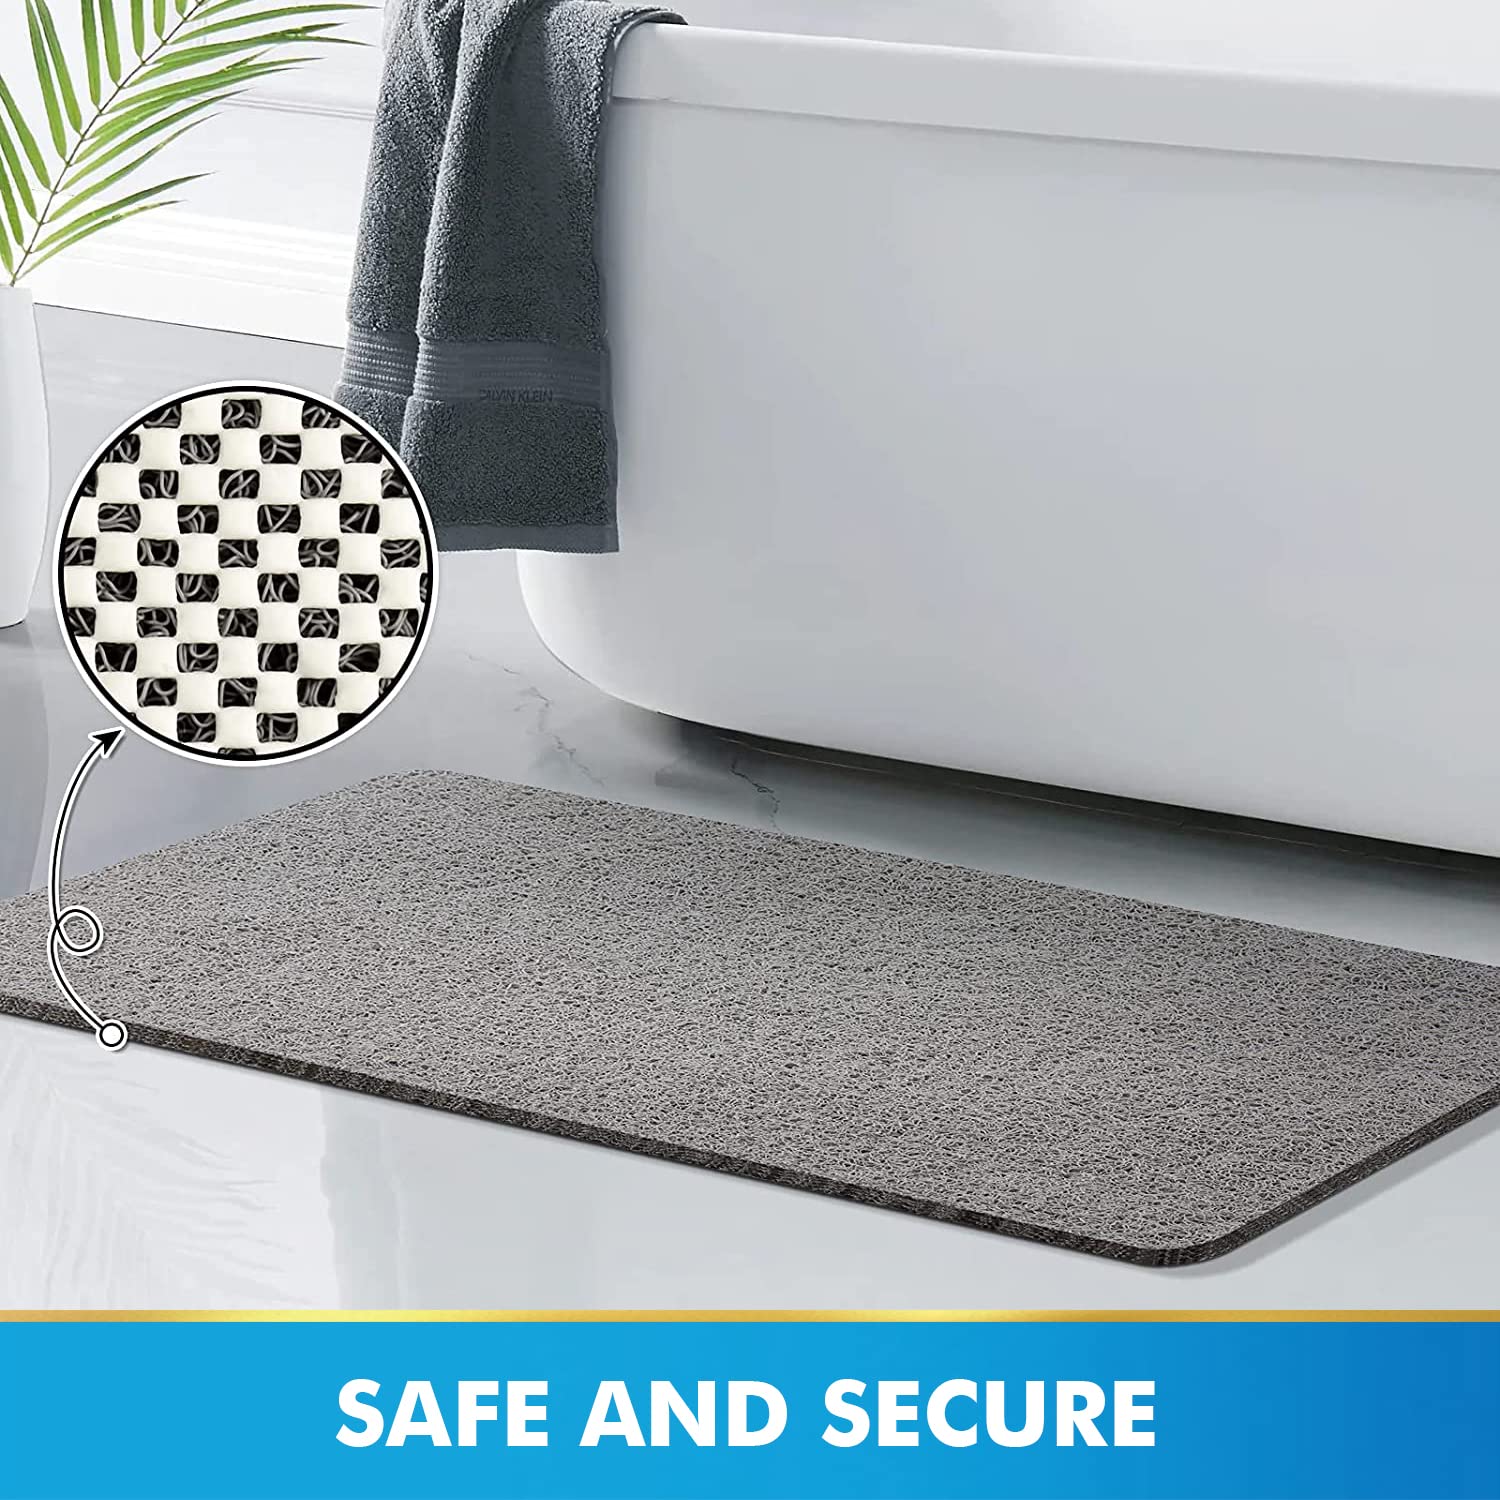 Dropship 28.34x16.73in Shower Mat Non-Slip Bath Mat With Drain Quick Drying  PVC Loofah Shower Mat For Bathroom Grey to Sell Online at a Lower Price